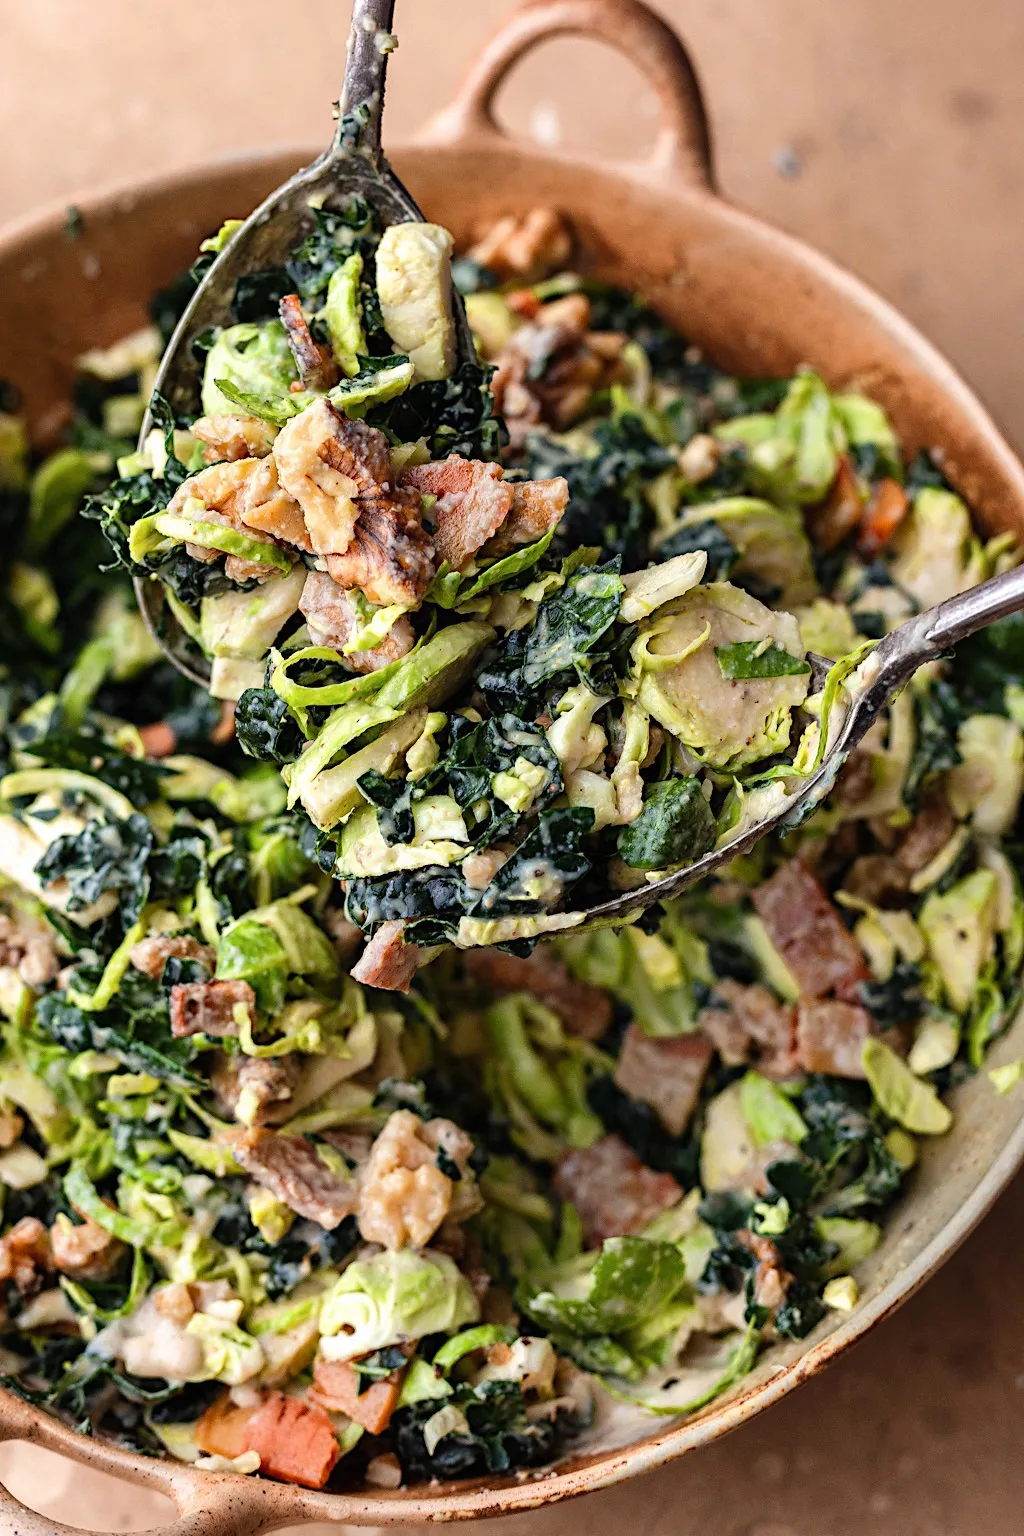 Vegan Shredded Sprouts, Kale, Walnut and Bacon Salad #salad #kale #brusselssprouts #bacon #vegan #dairyfree